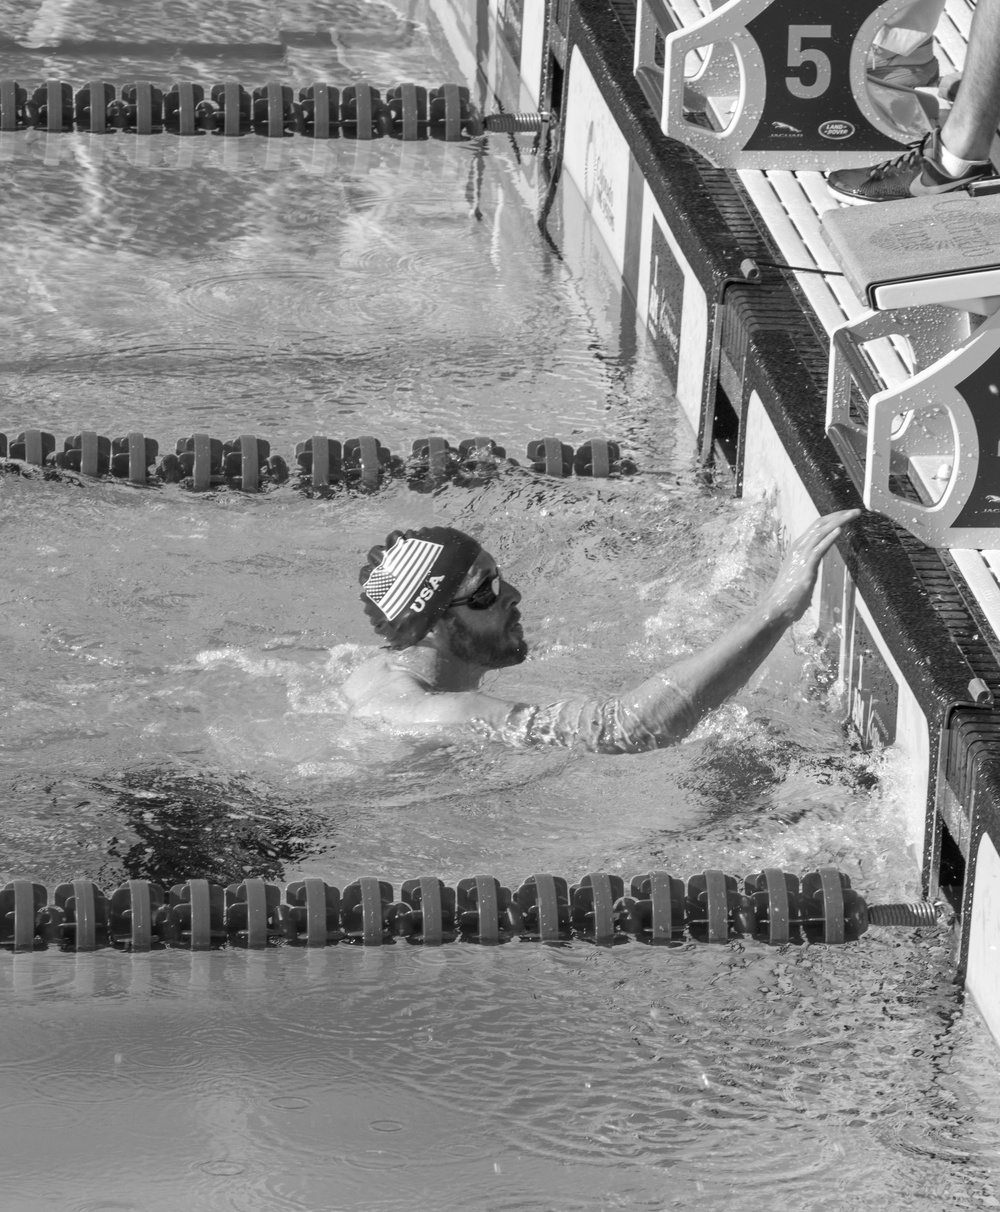 Wounded Warriors Compete in Swimming Preliminaries at 2016 Invictus Games